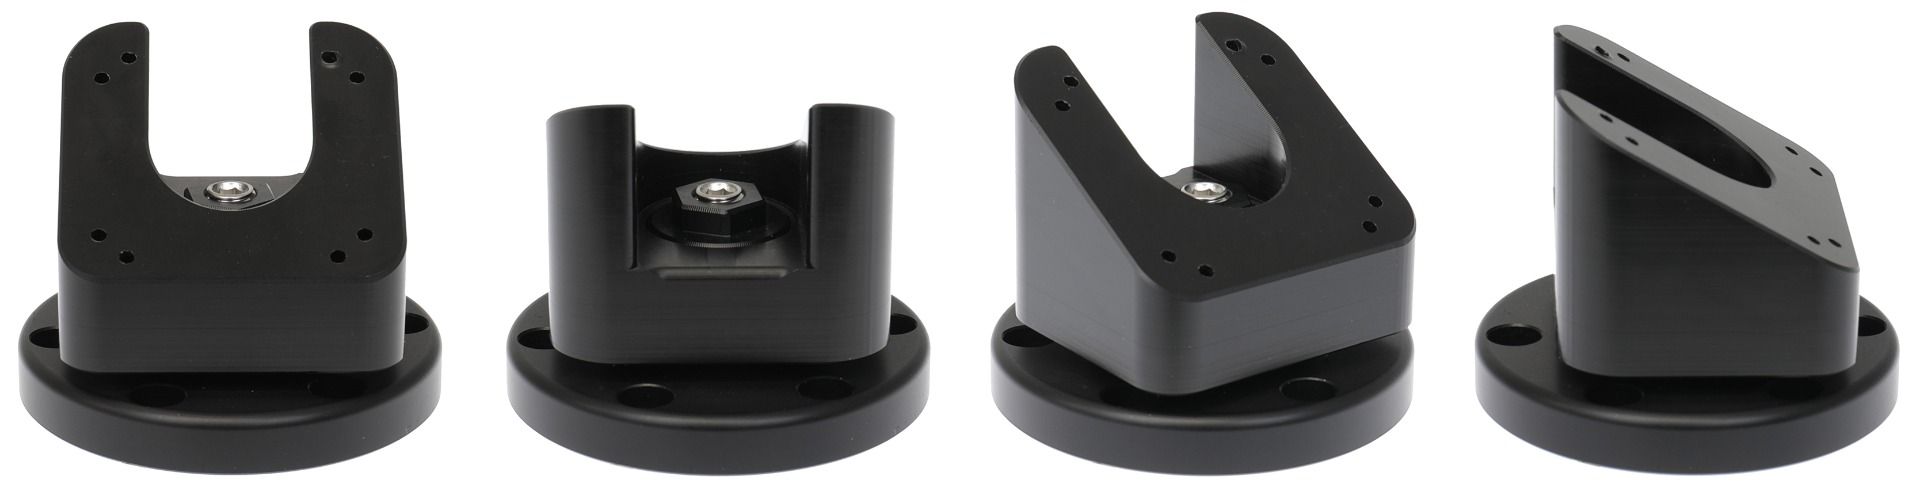 Pedestal Mount Top Part with 360° turnaround, AMPS holes